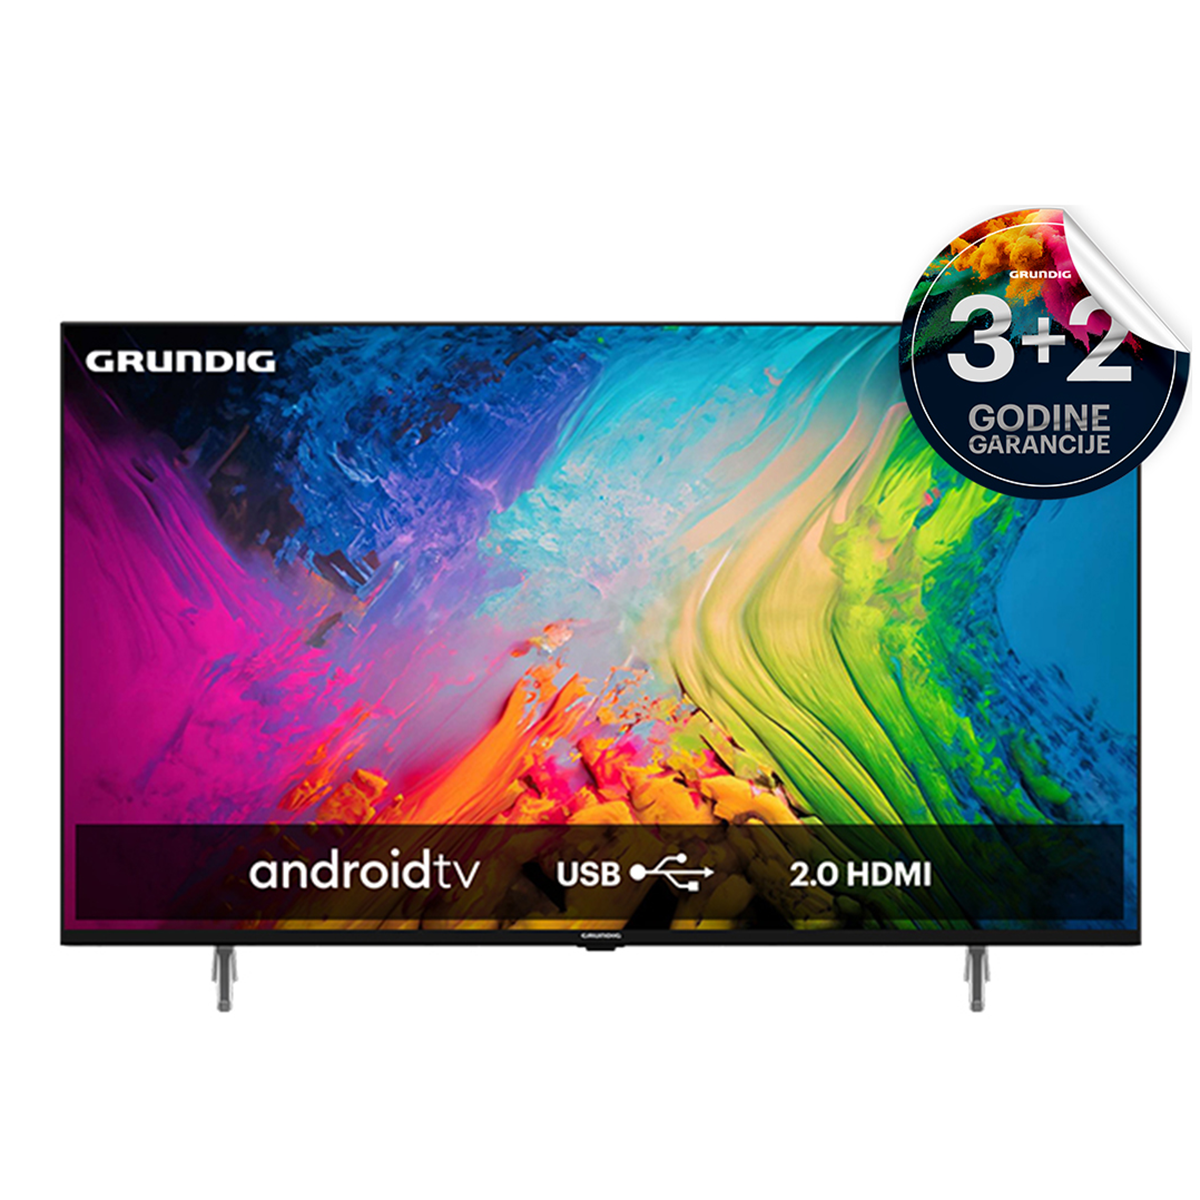 LED TV 50in GHU 7800 B Android slika proizvoda Front View L